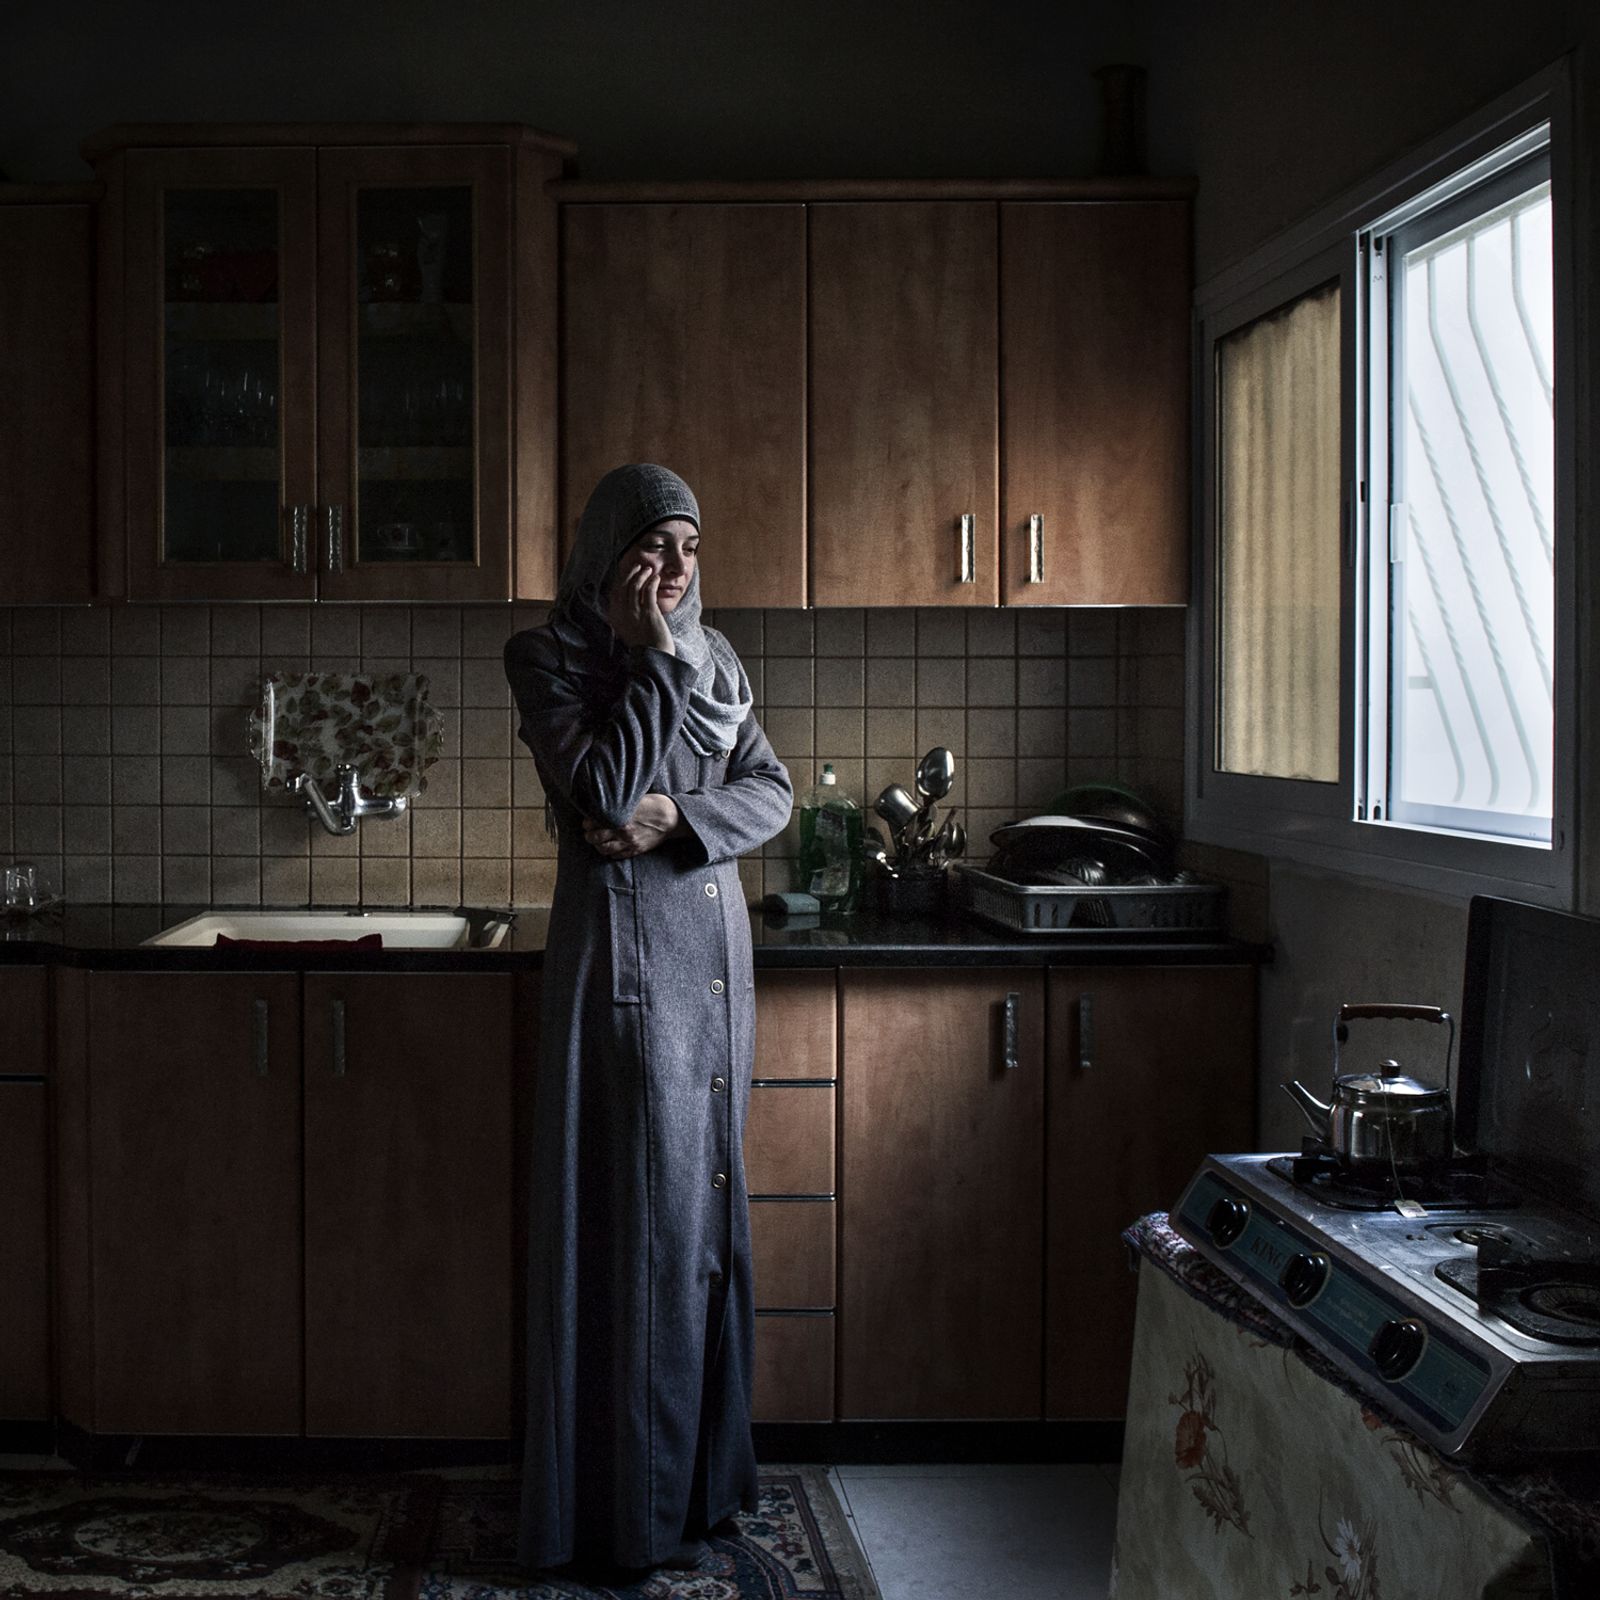 © Antonio Faccilongo - Bethlehem, Palestine. Manal Assaf (32) is the wife of Imad (37). Imad was sentenced to 25 years.